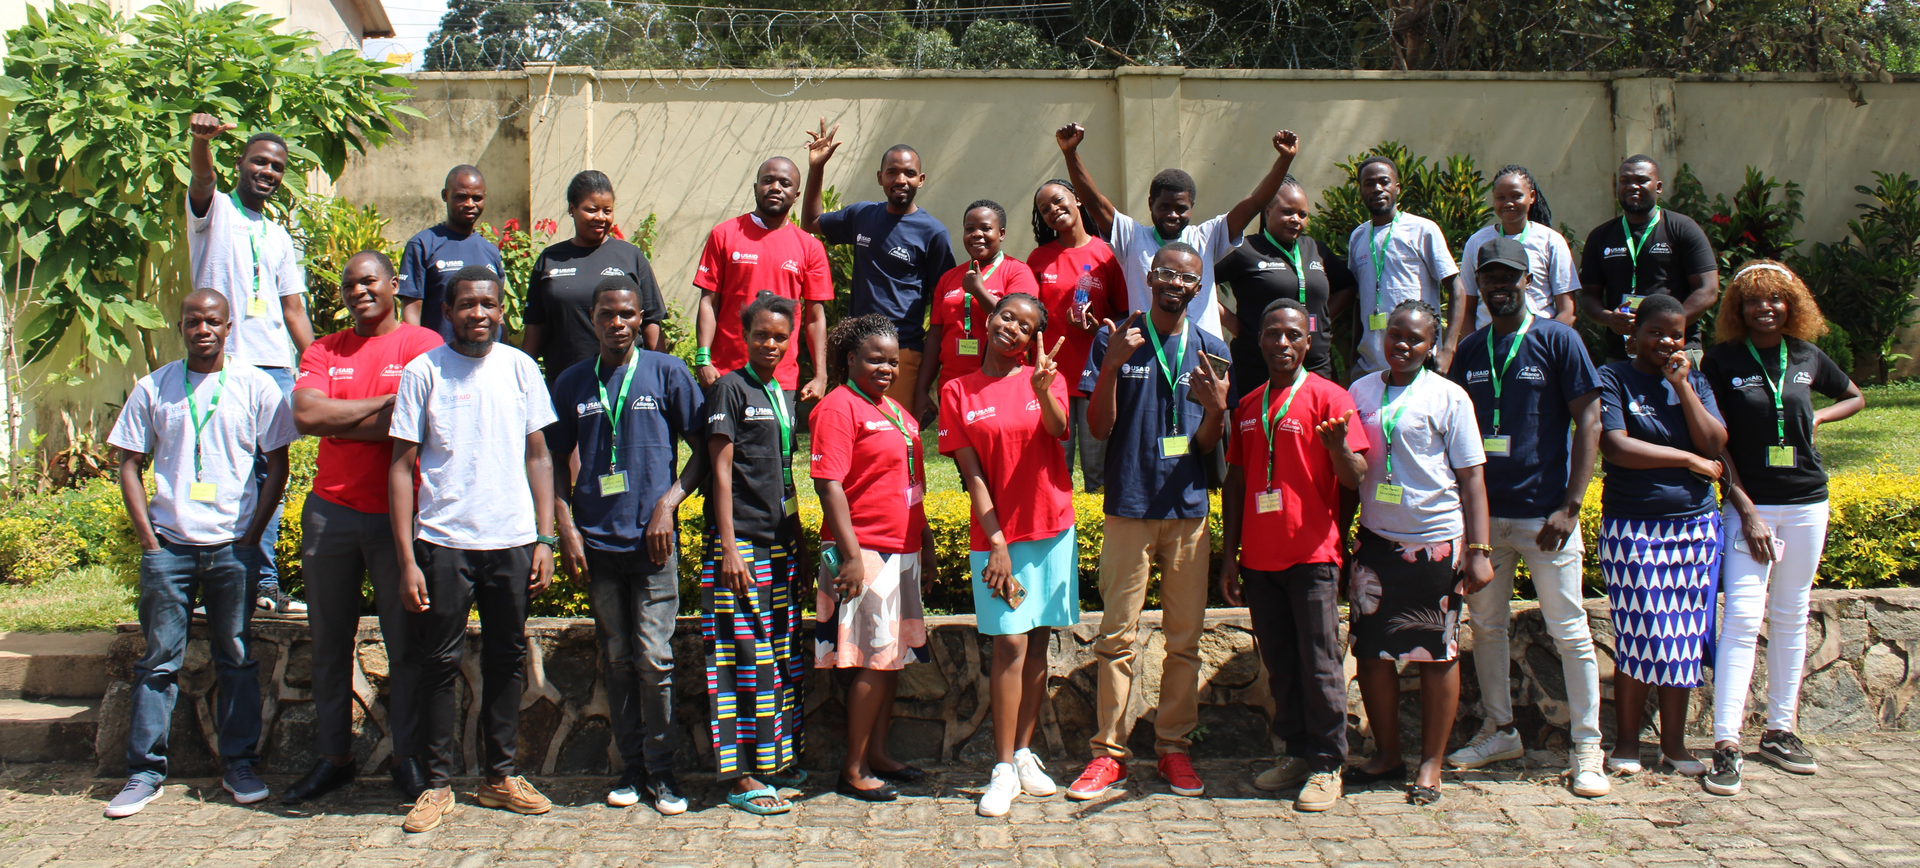 promoting-youth-entrepreneurship-in-malawi-the-business-acceleration-for-youth-project-incubation-program